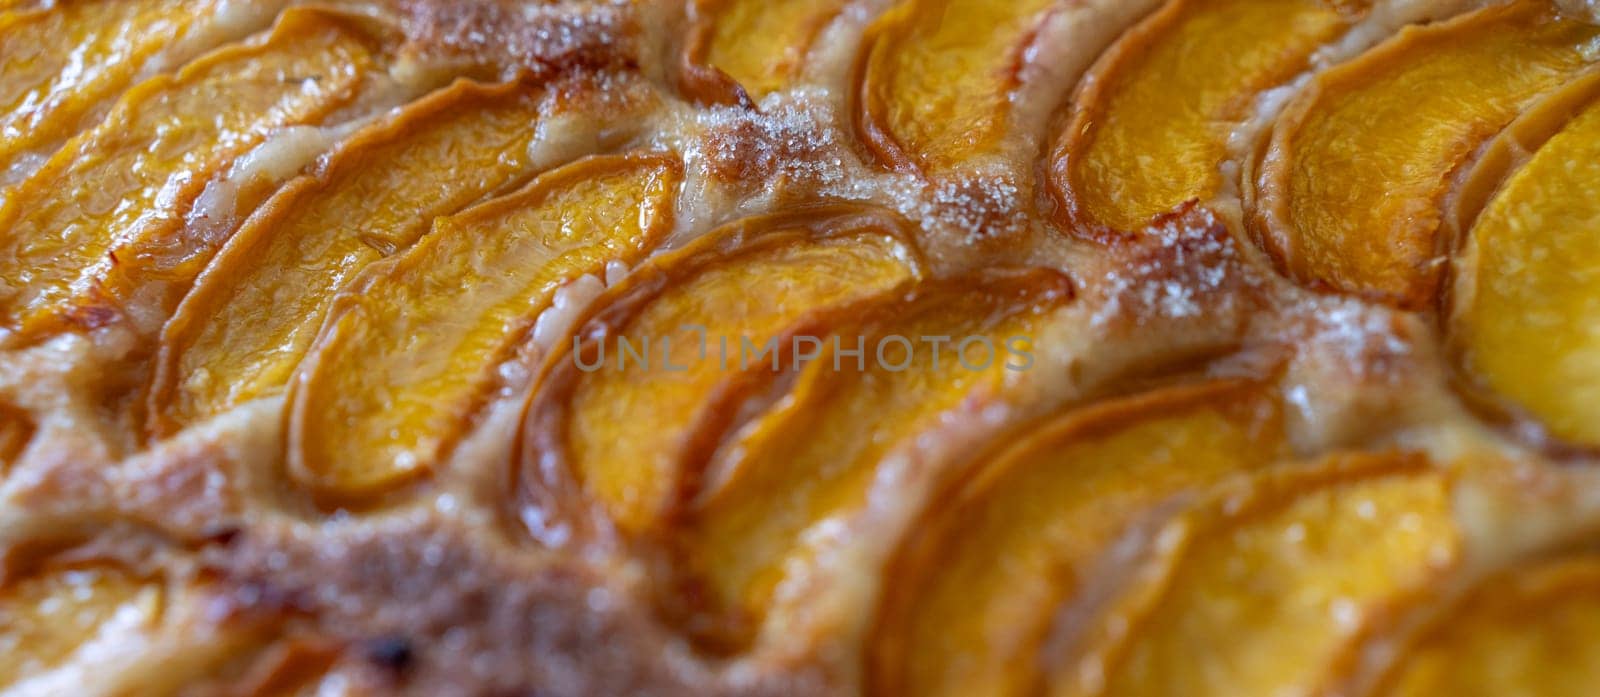 A close up of a dessert made of sliced peach. The dessert is covered in a caramel glaze and has a golden brown crust. The peach are arranged in a spiral pattern, creating a visually appealing by Matiunina